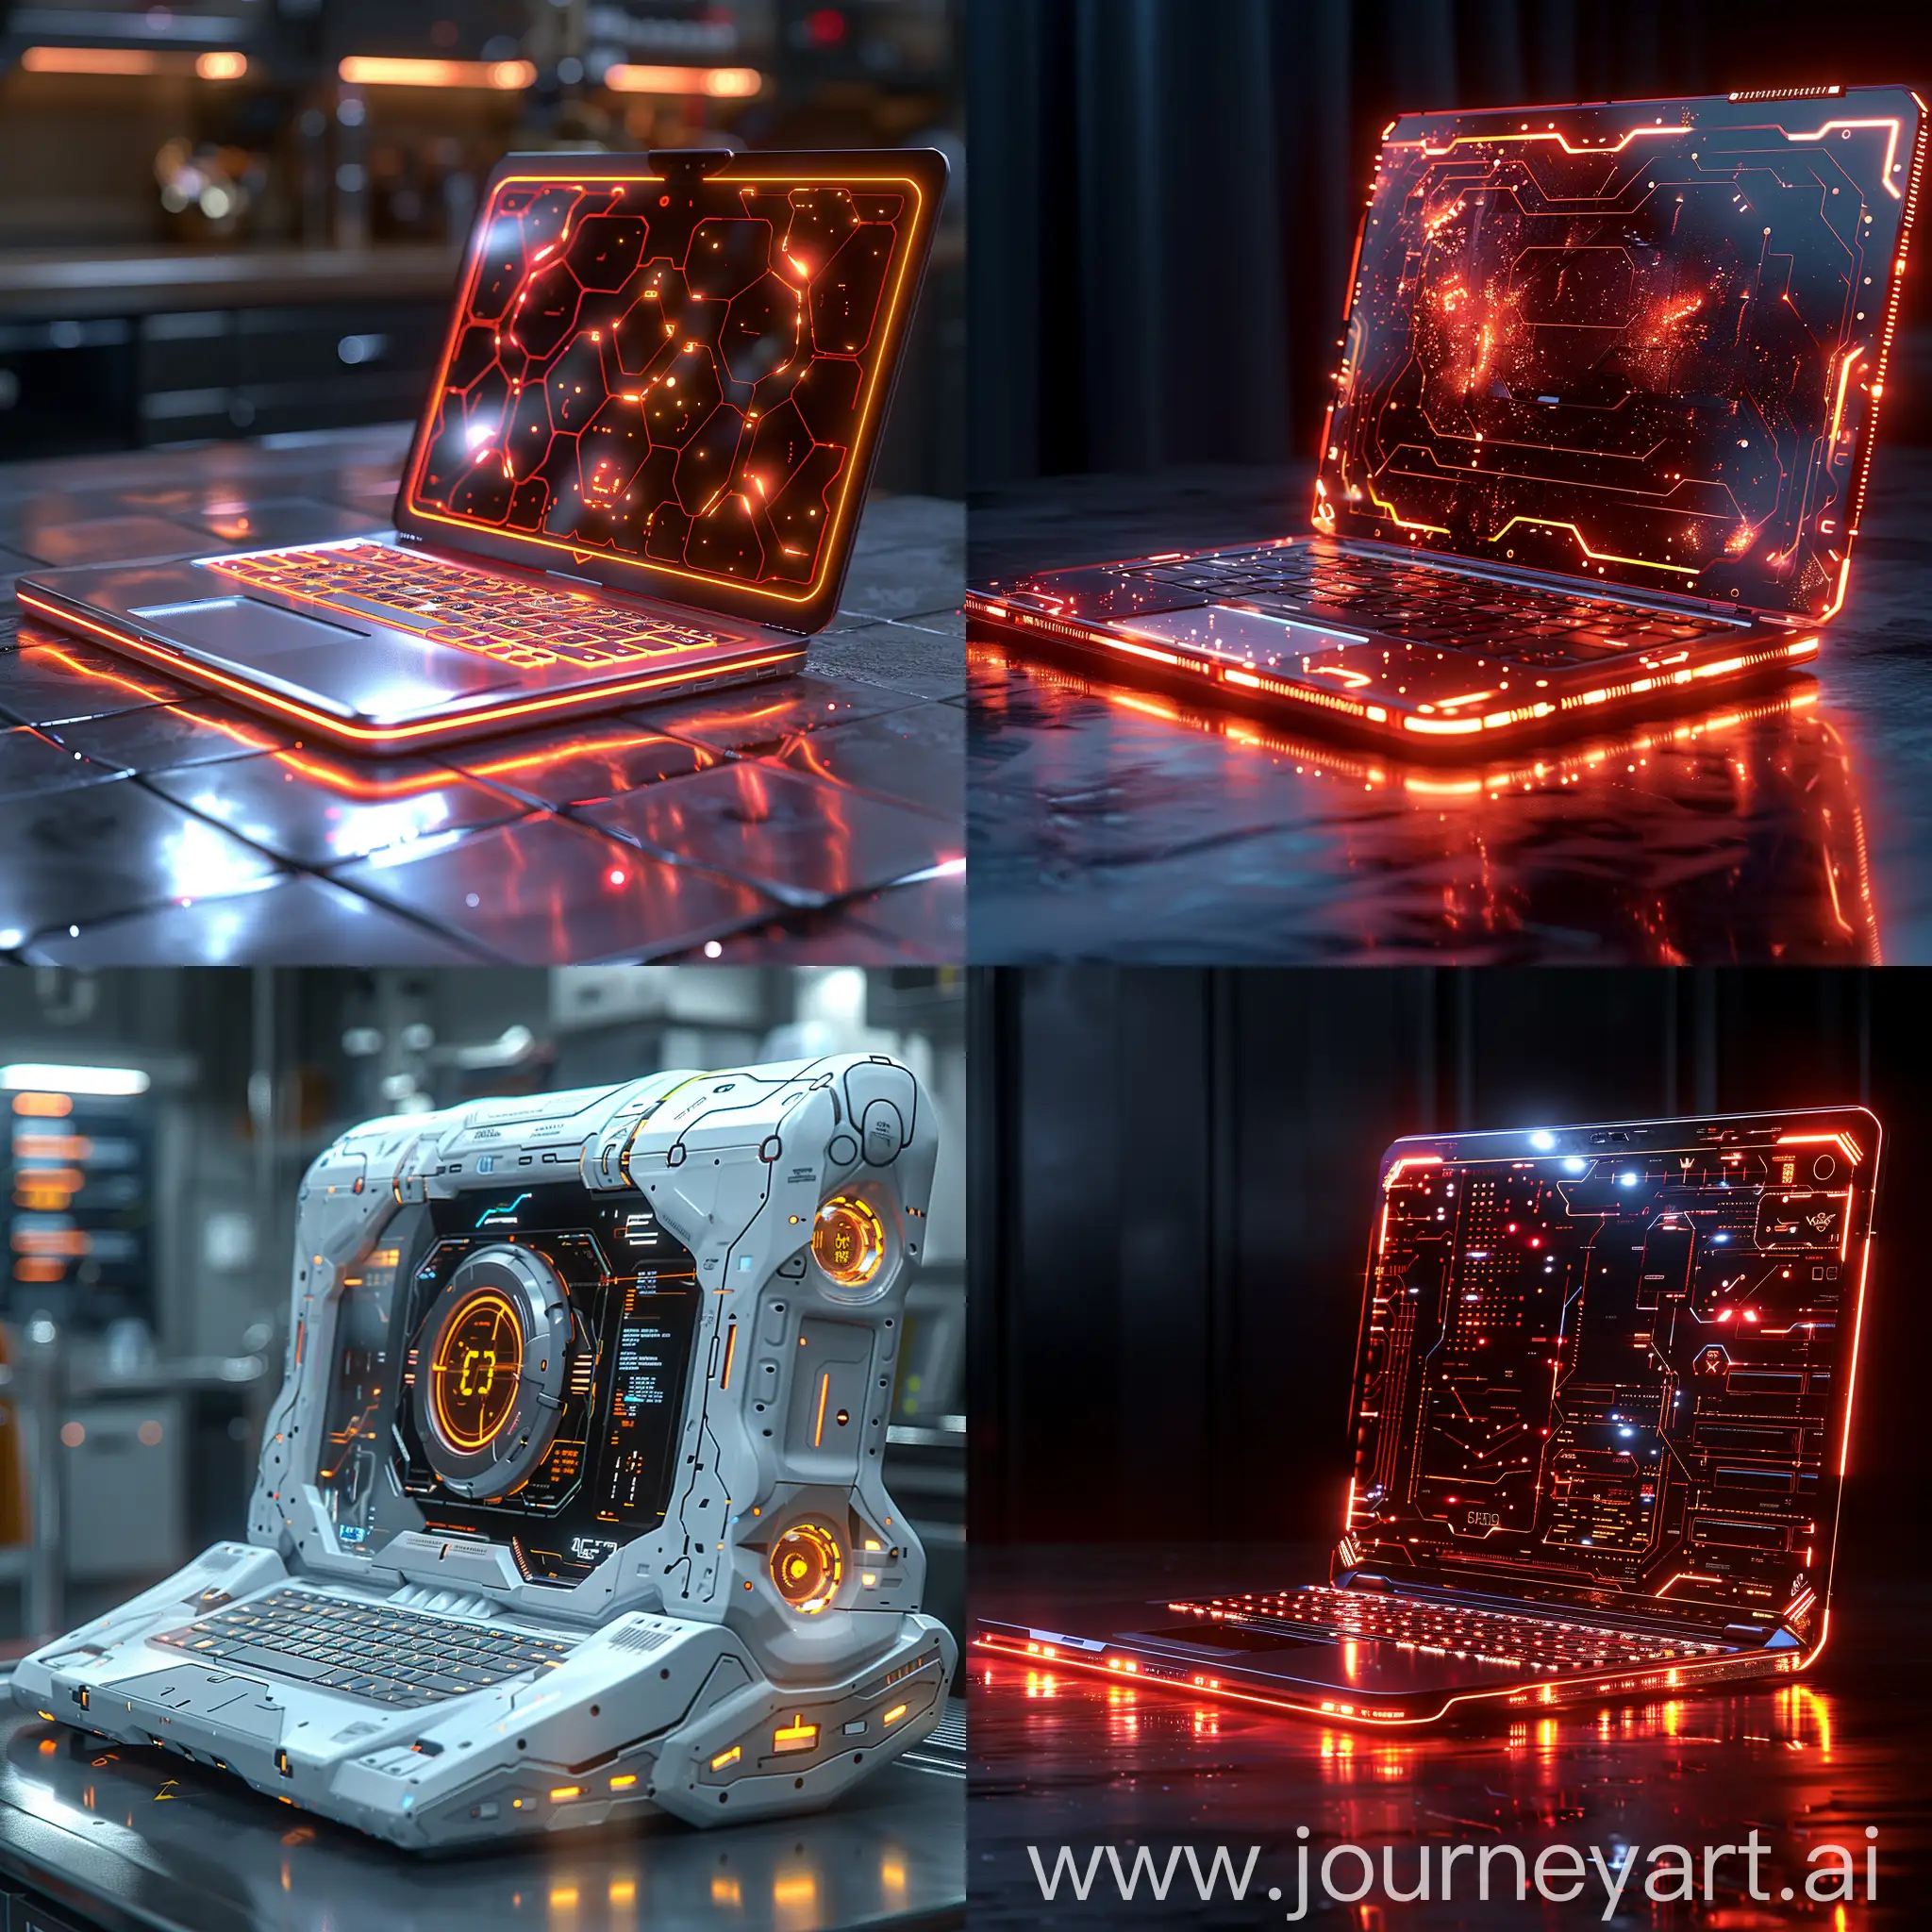 Futuristic-LowCarbon-Laptop-in-HighTech-Style